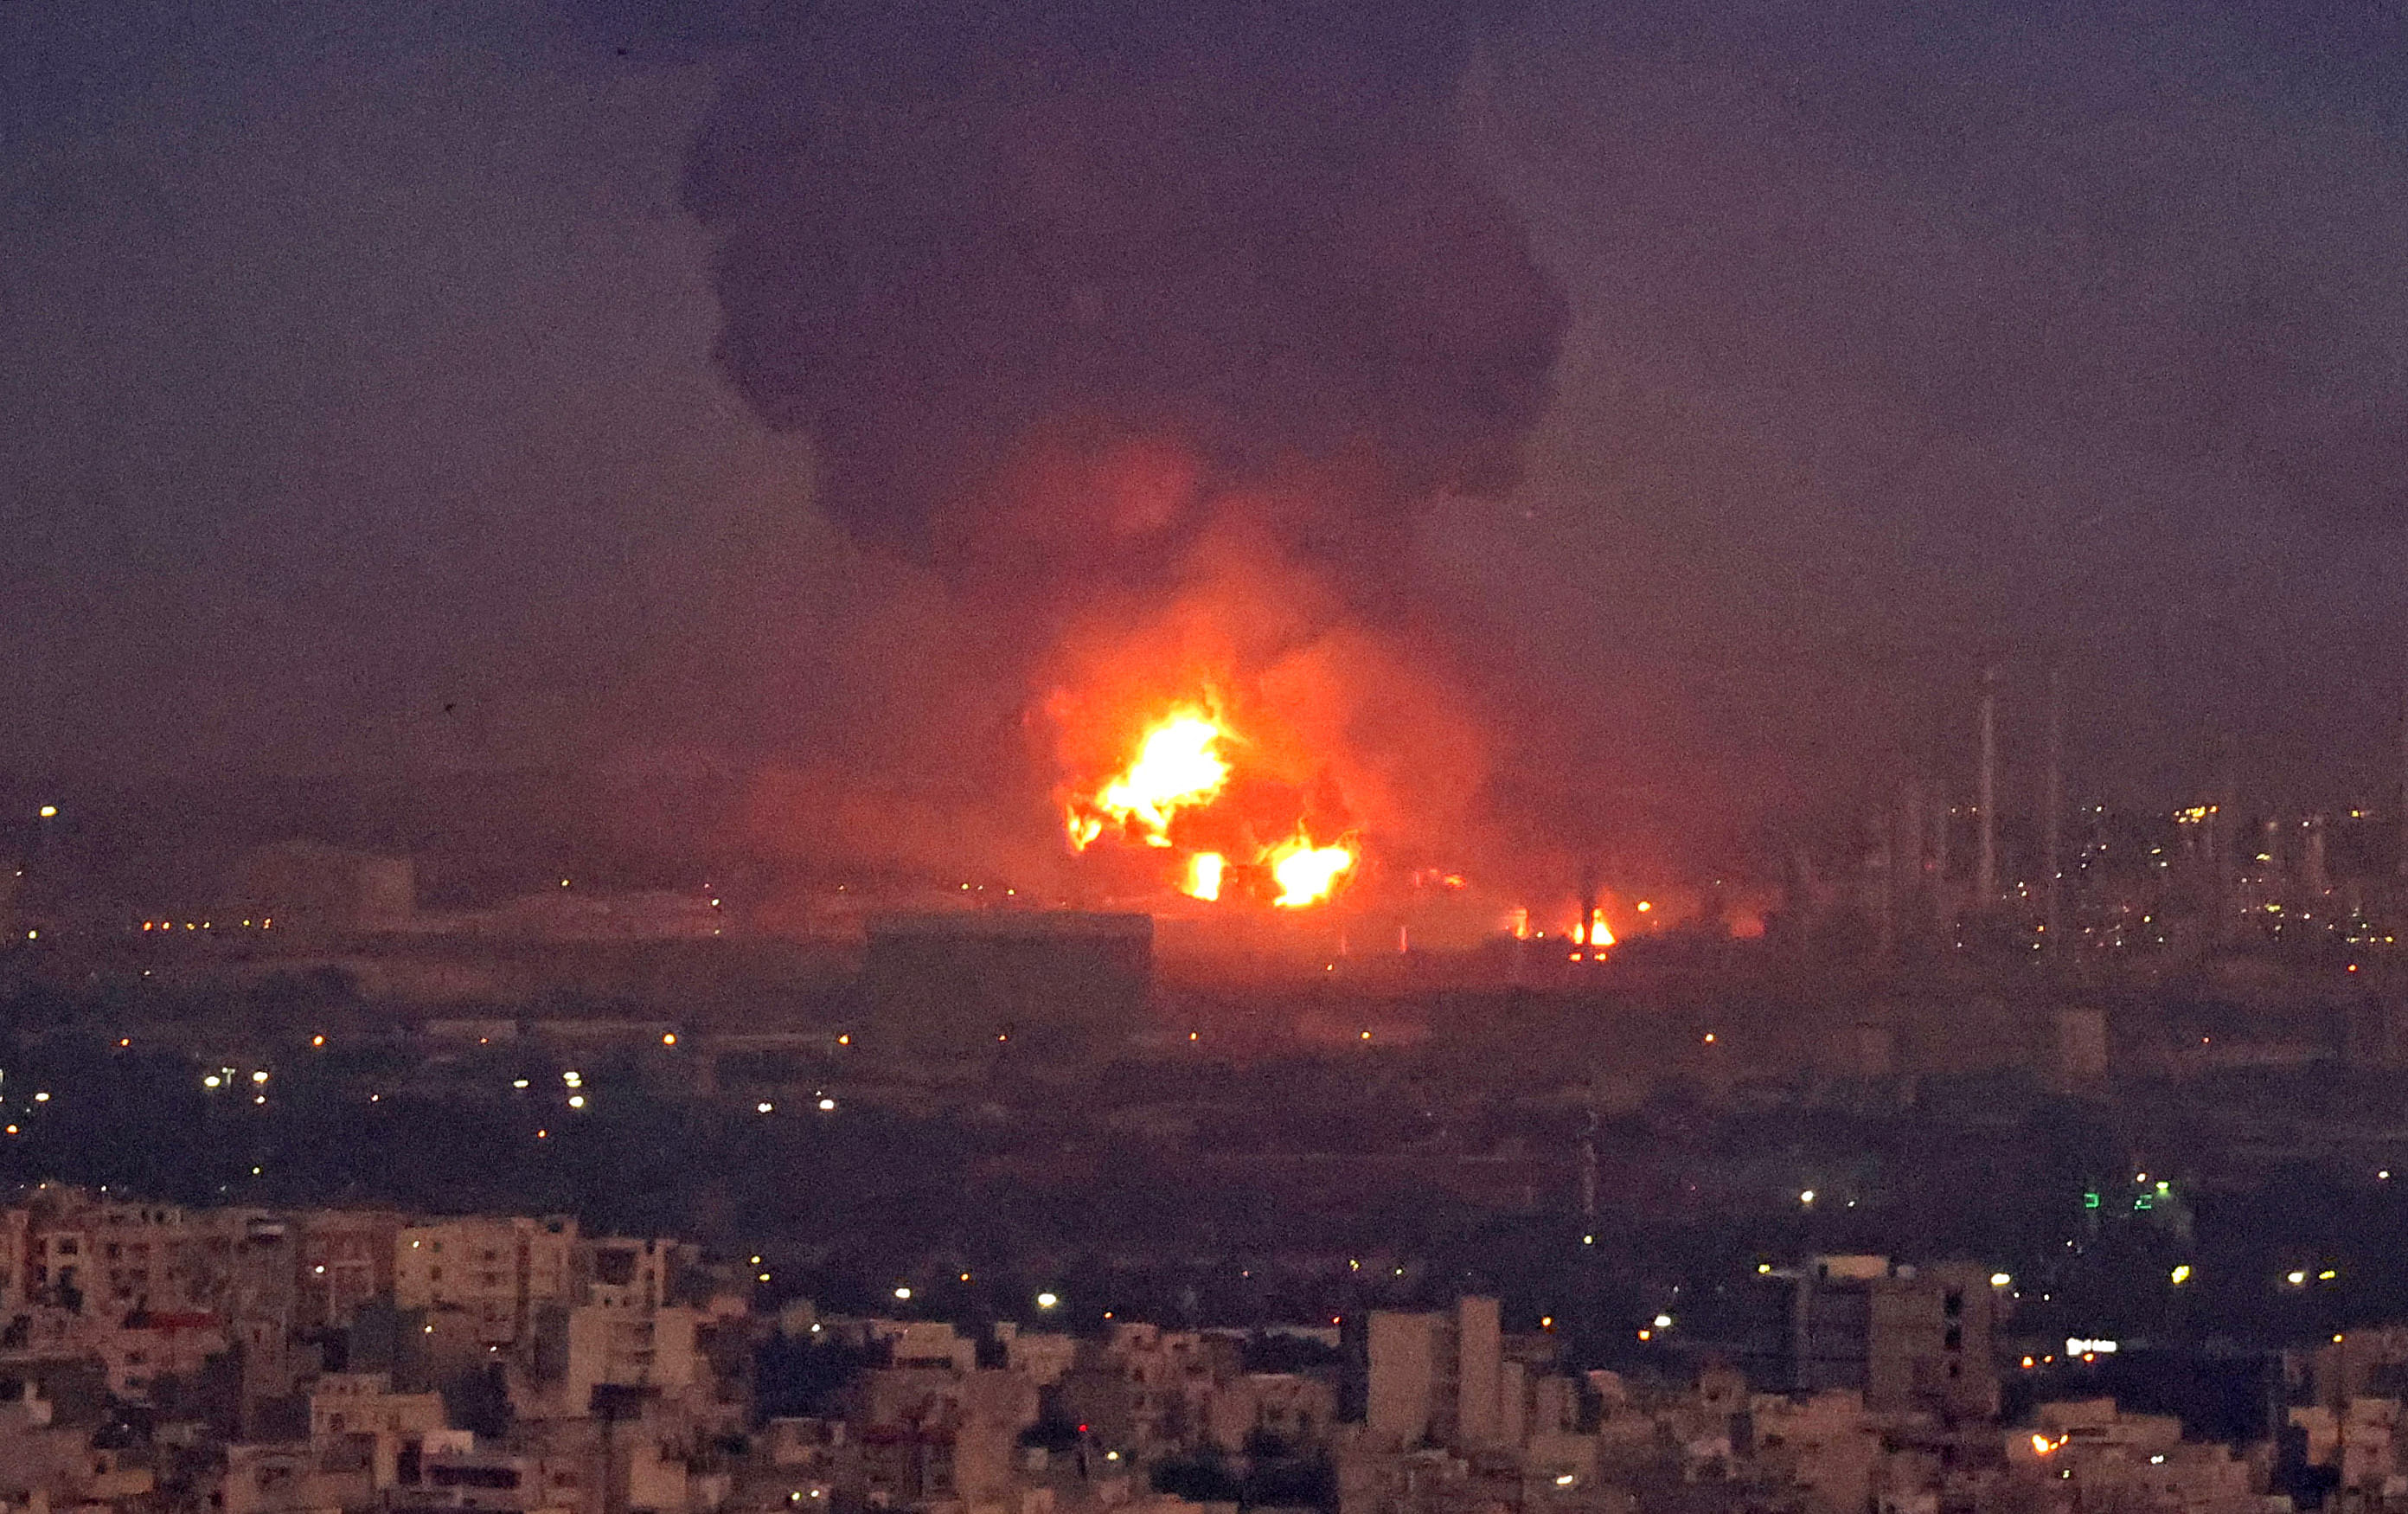 A fierce blaze broke out at a refinery in southern Tehran after a liquefied gas line leaked and exploded, the head of the capital's crisis team said on state television. Credit: AFP Photo